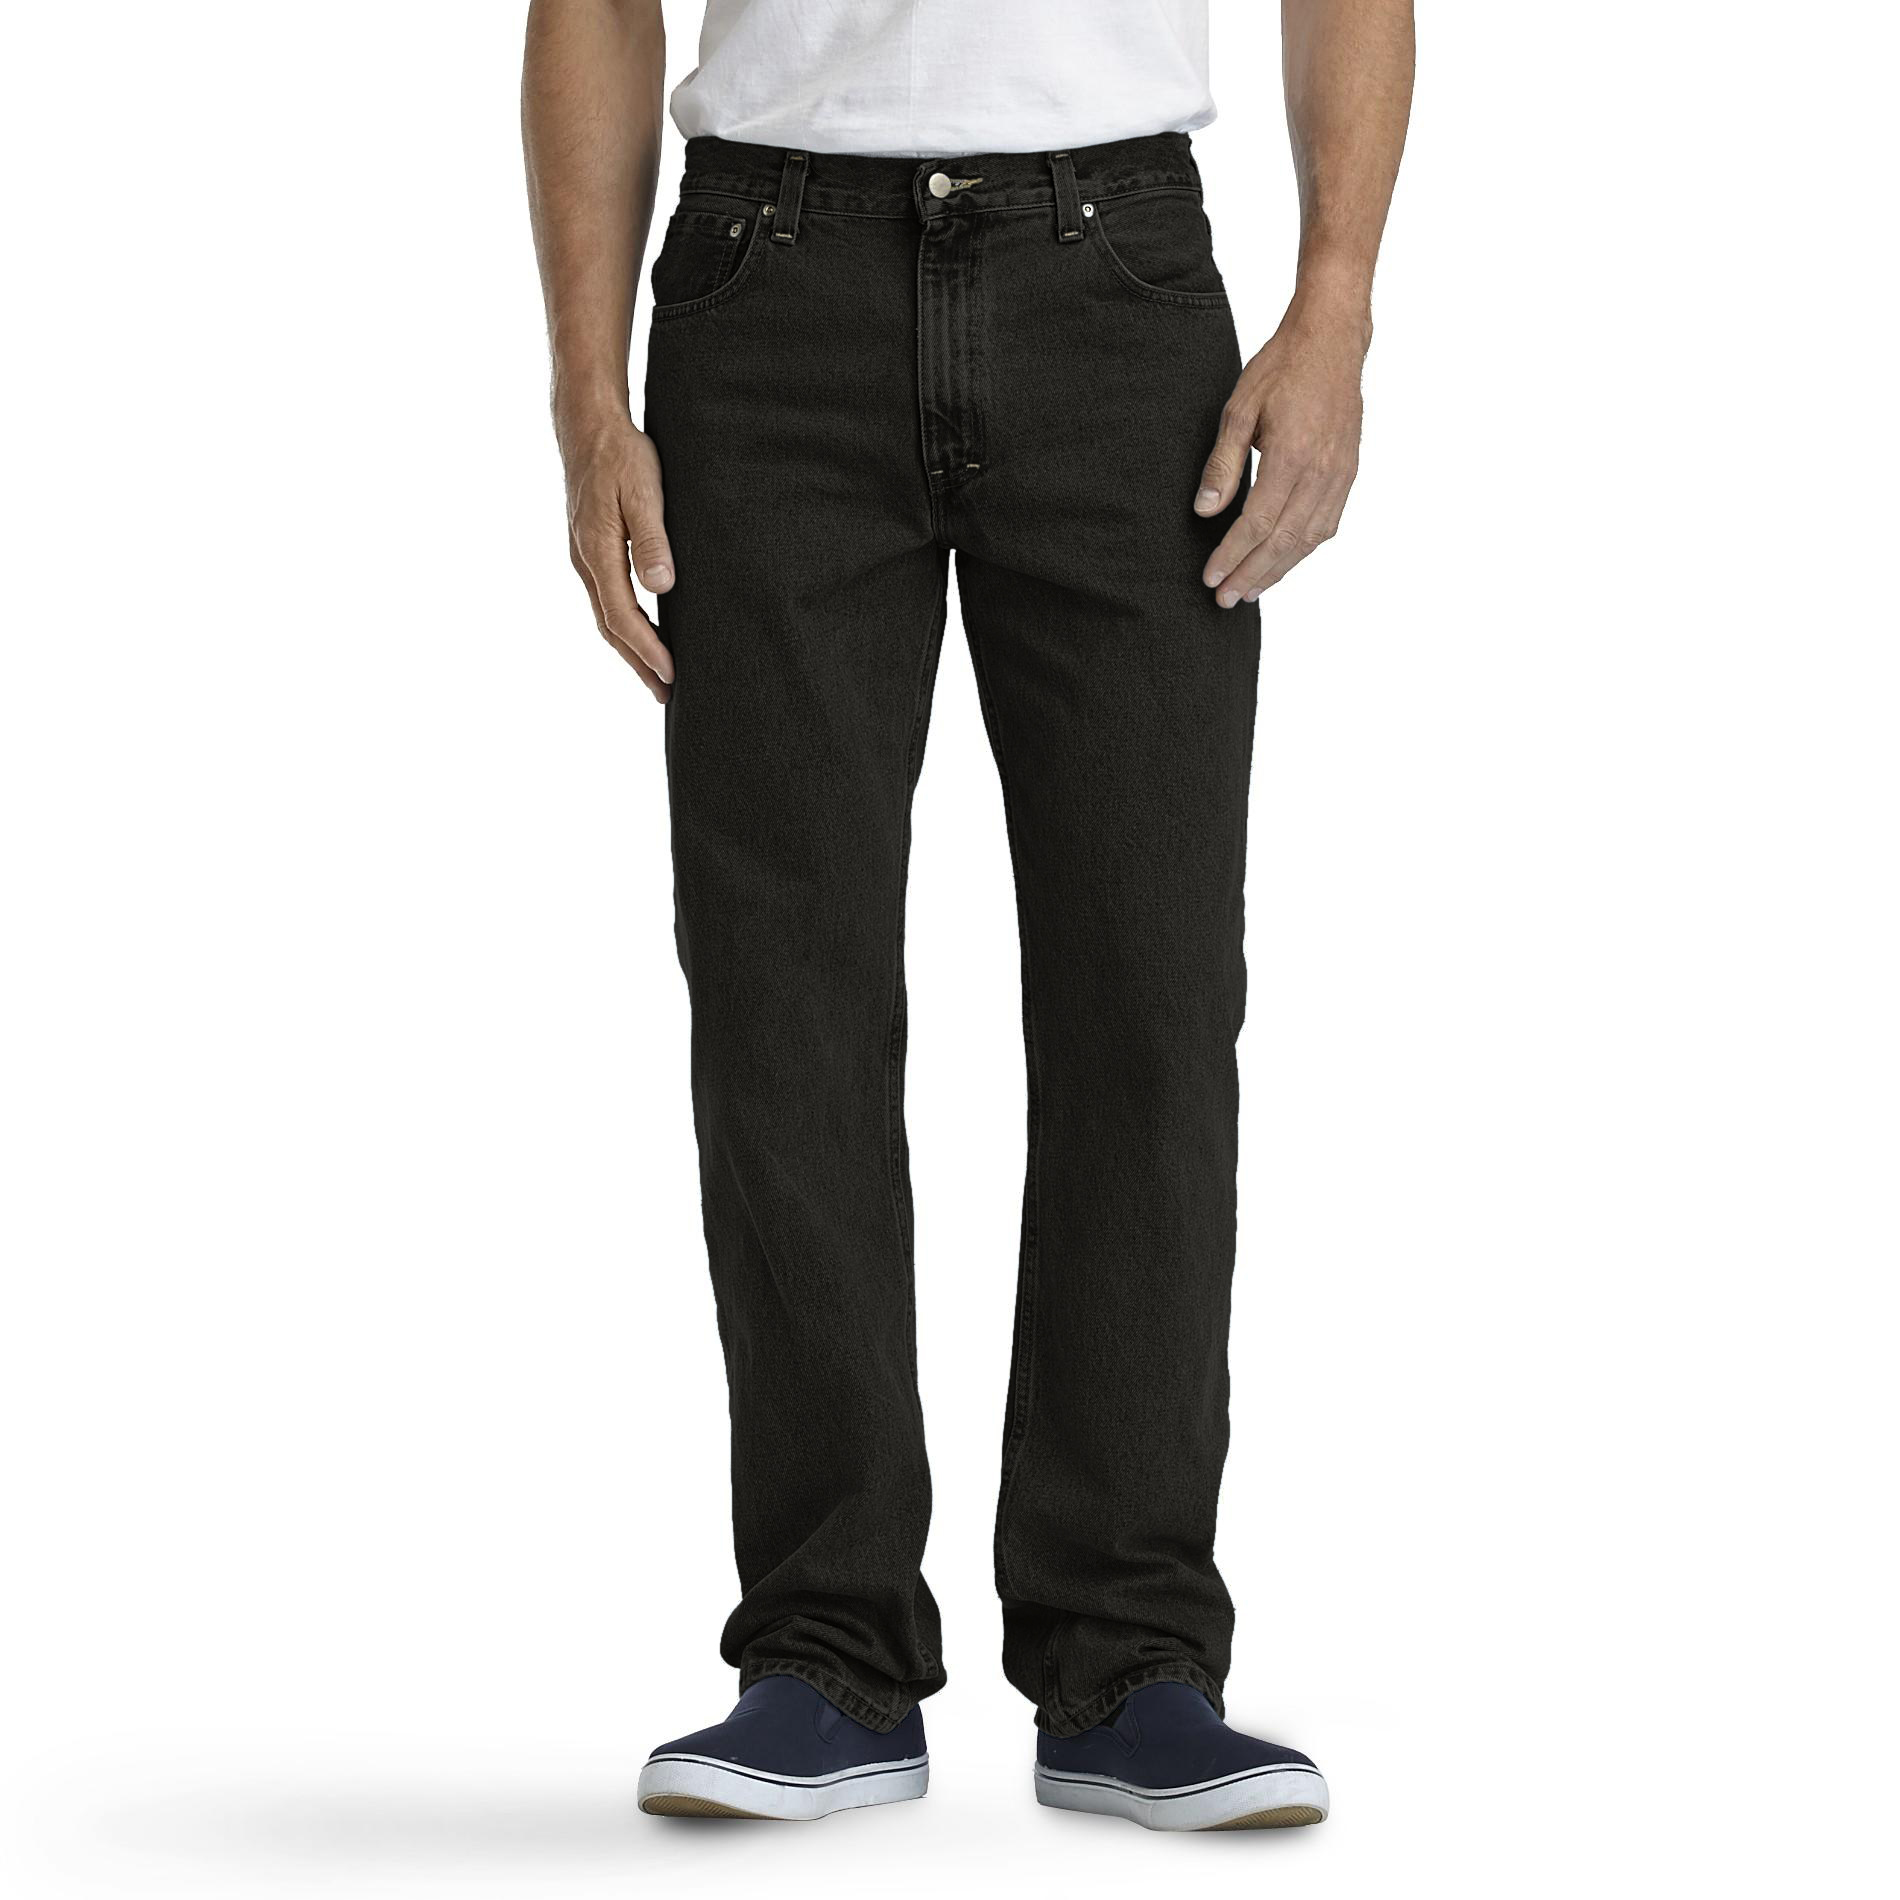 Basic Editions Men's Relaxed Fit Denim Jeans | Shop Your Way: Online ...